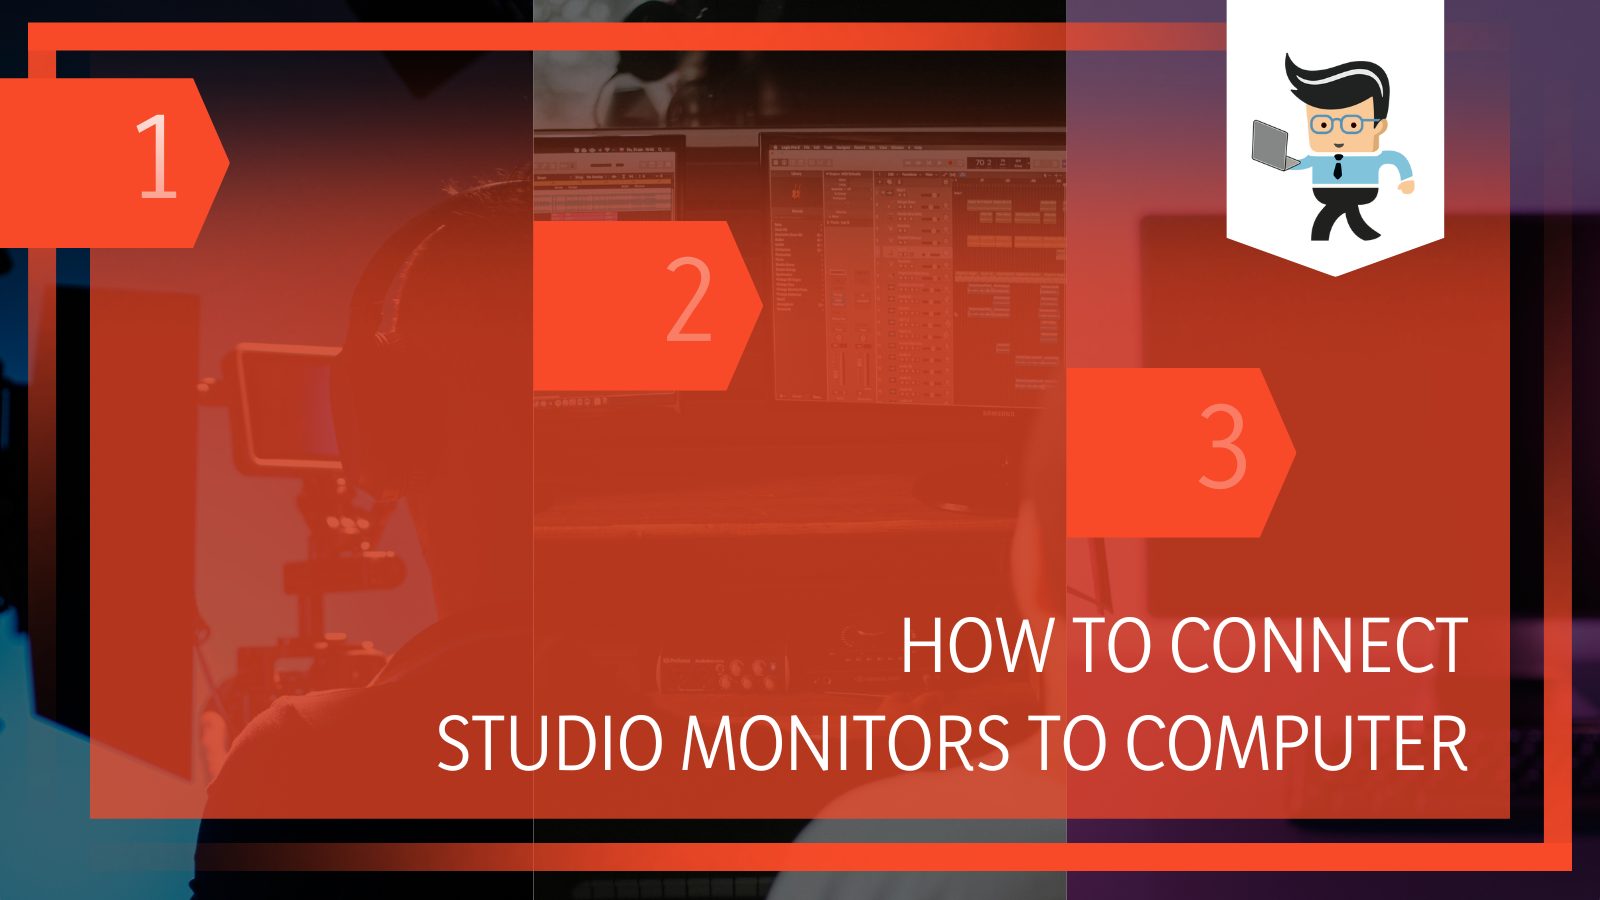 How To Connect Studio Monitors to Computer